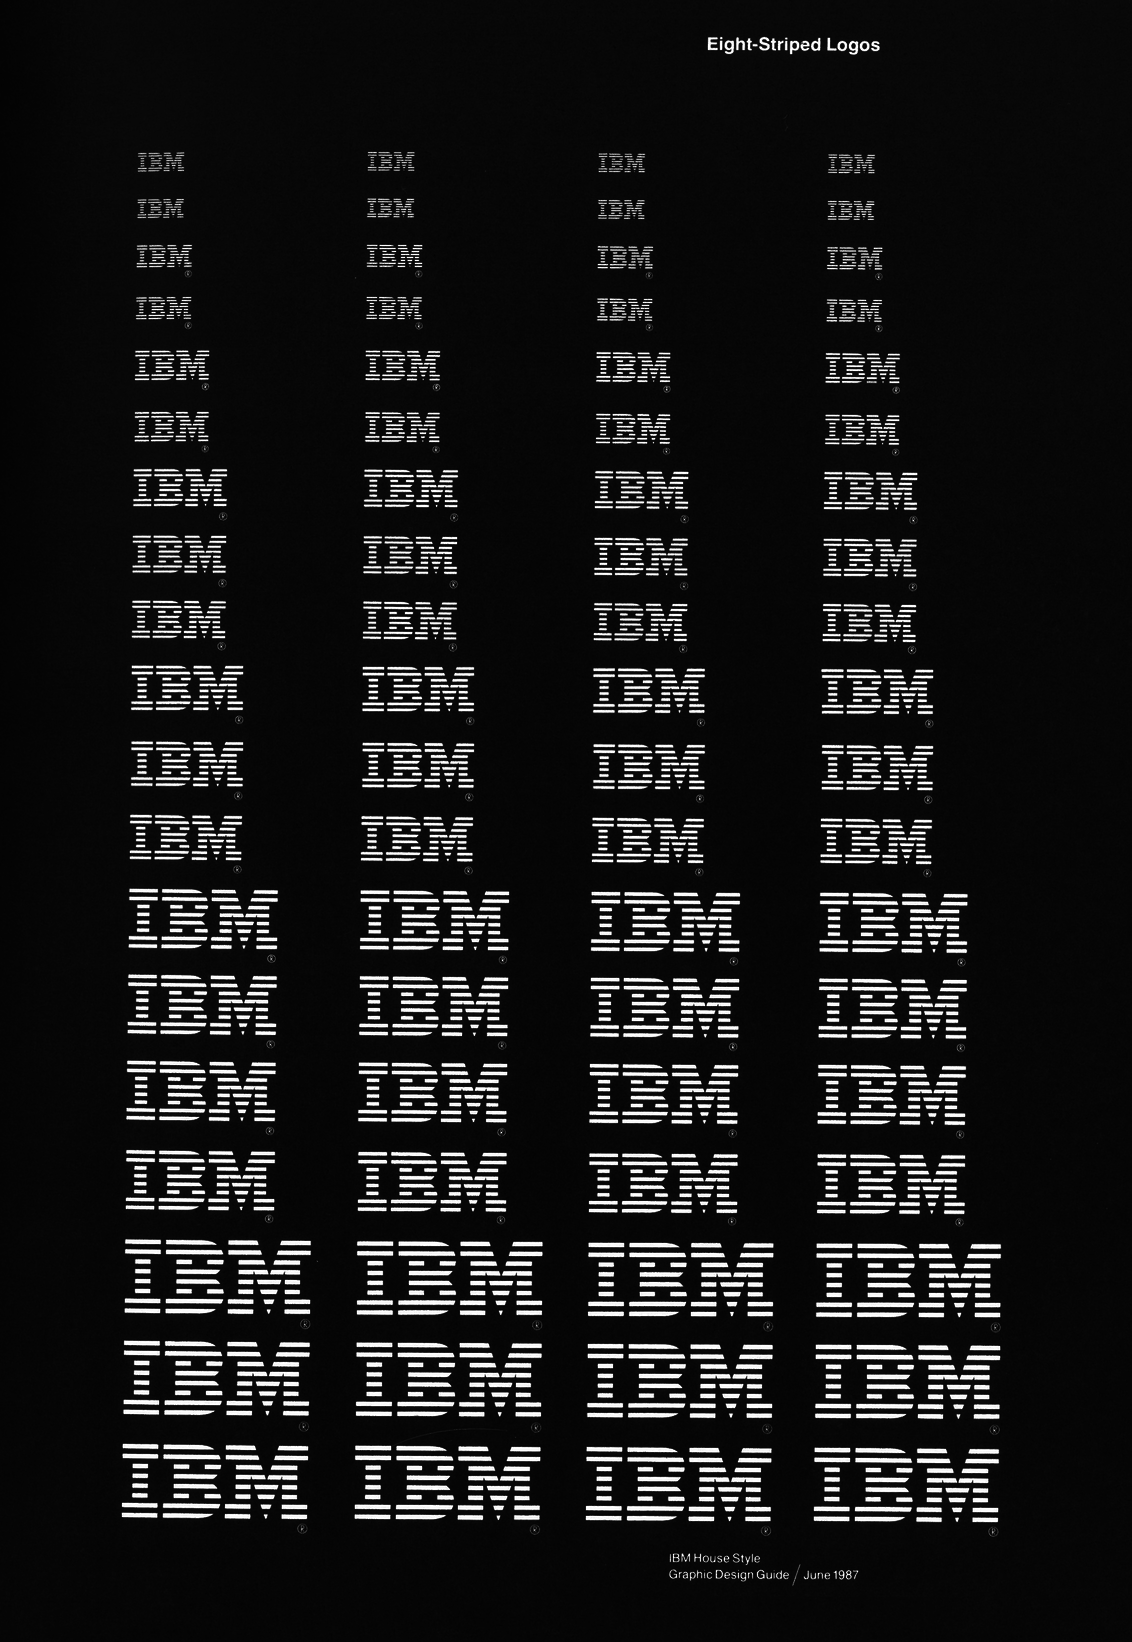 Paul Rand IBM Logo - It's Nice That. Design to improve the general quality of life